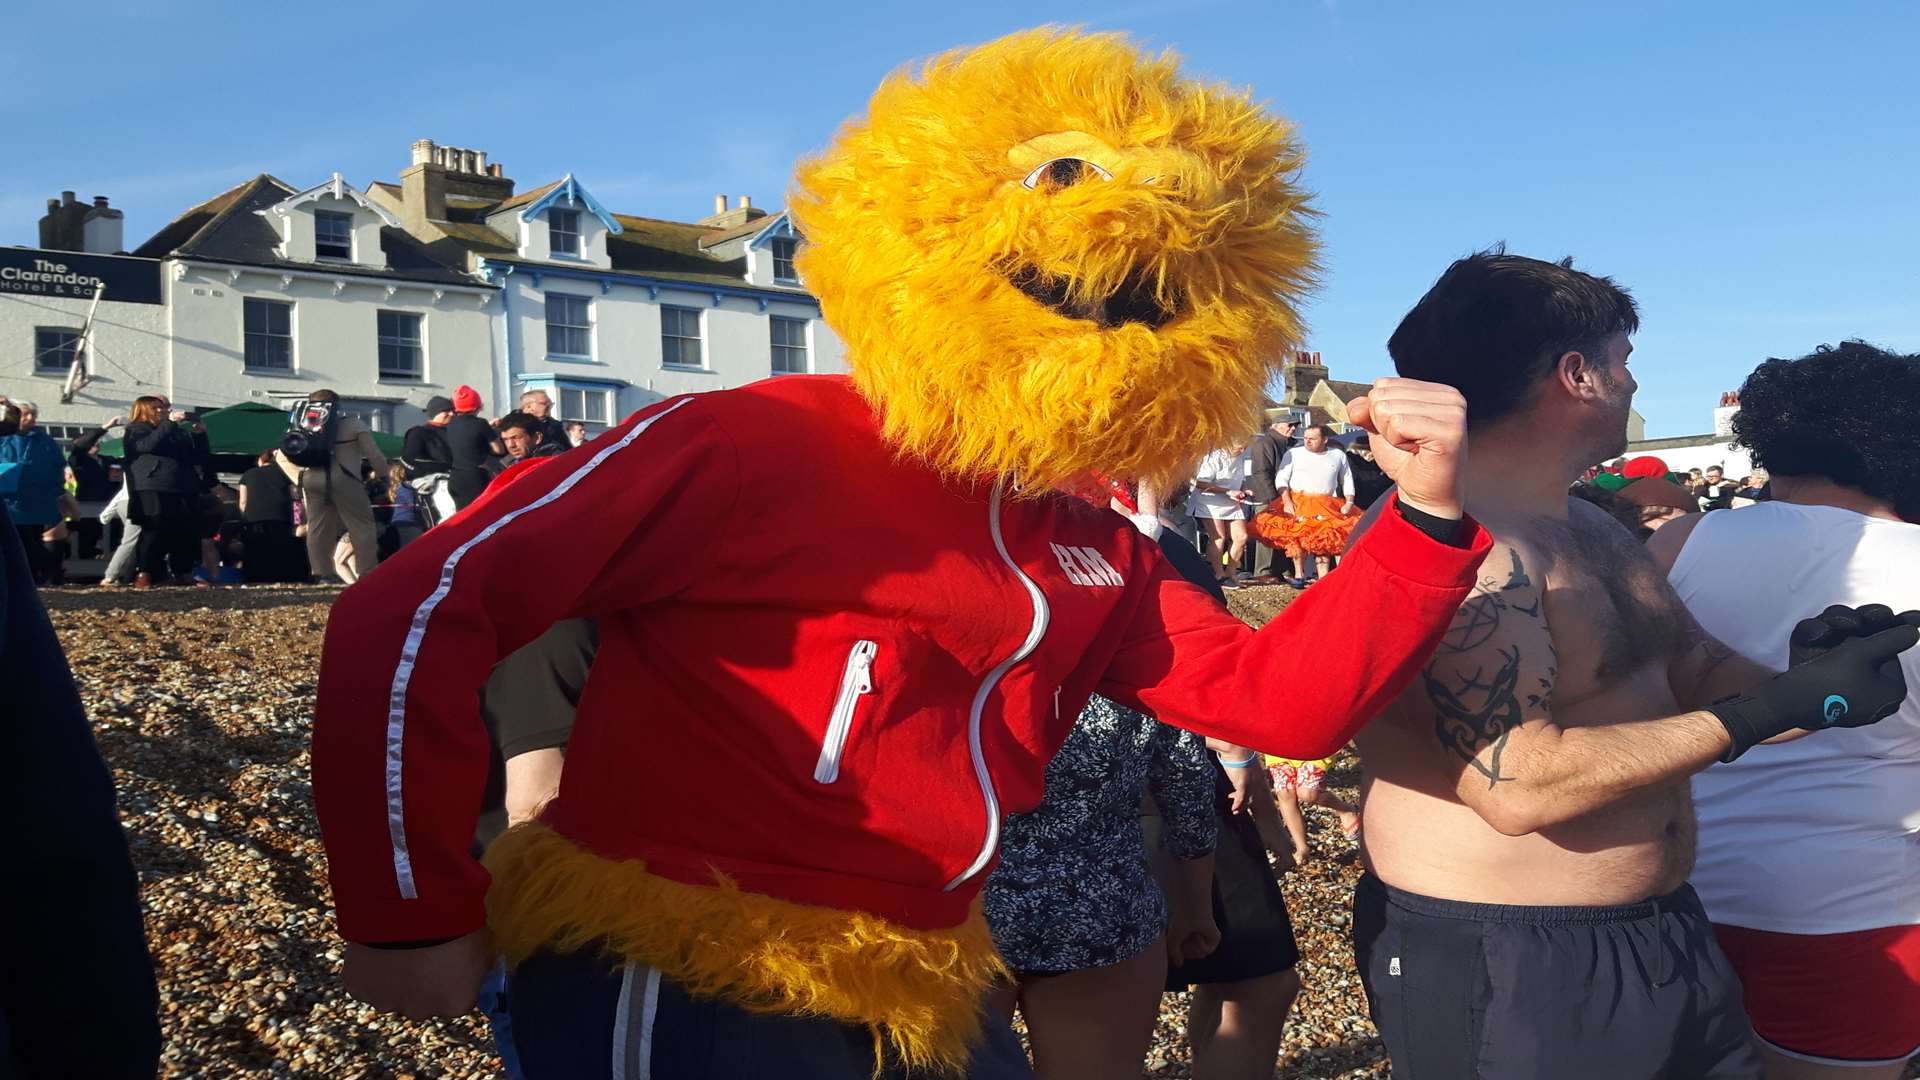 The Honey Monster: Jeff Peters dug out an old fancy dress costume